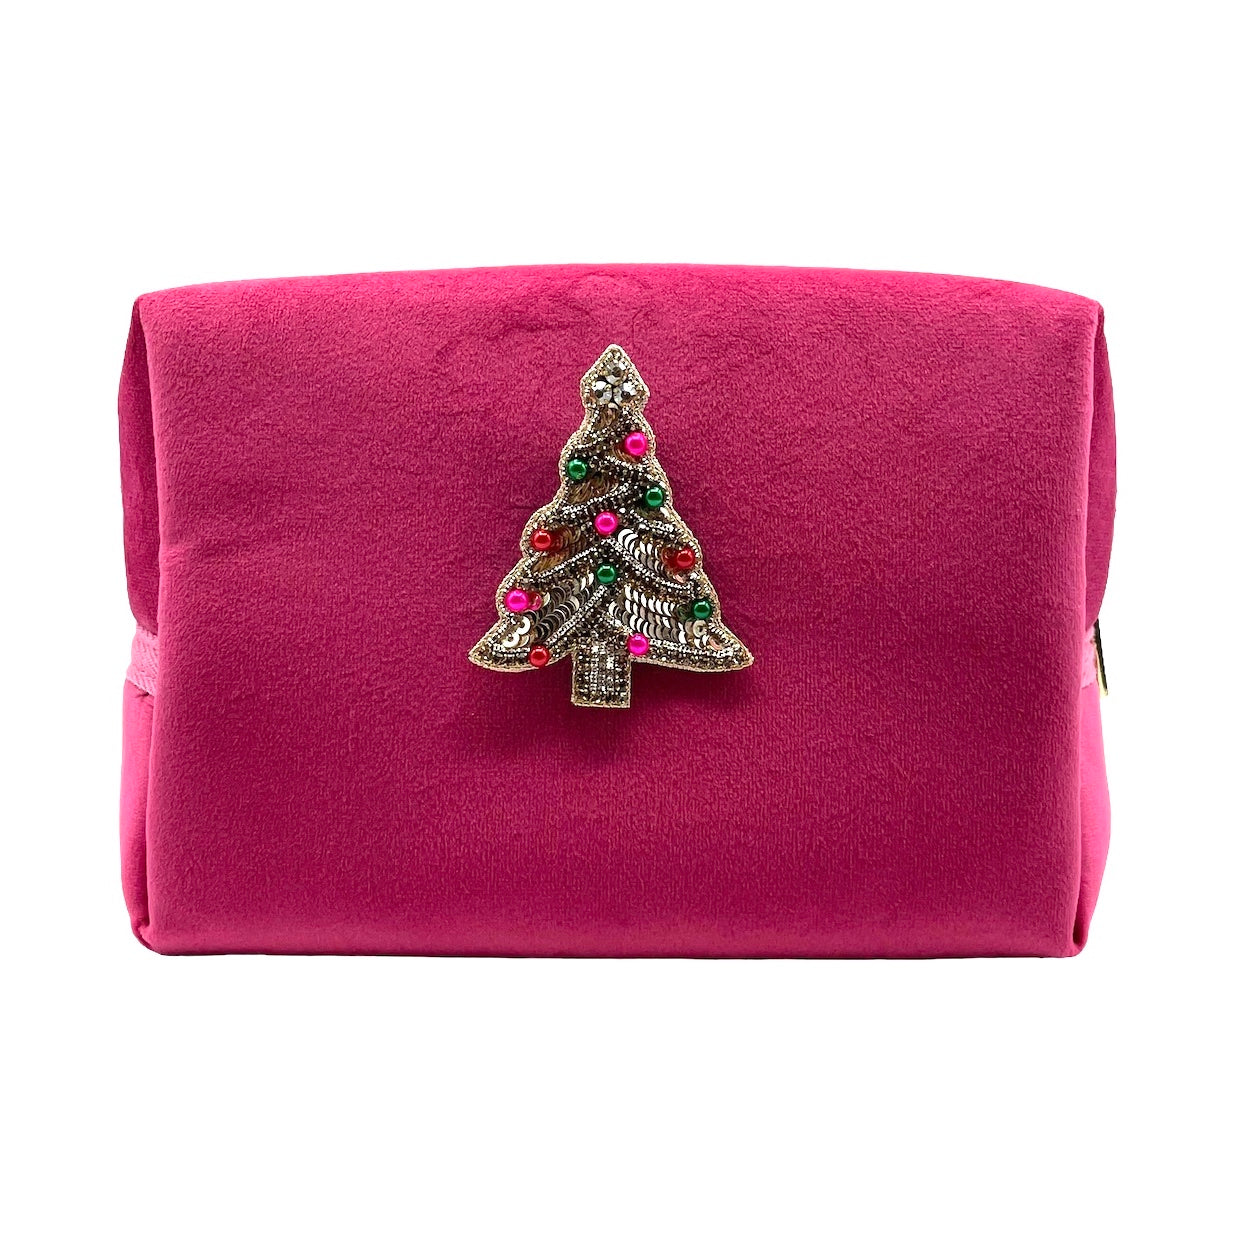 Bright pink make-up bag and a kitsch tree pin - recycled velvet